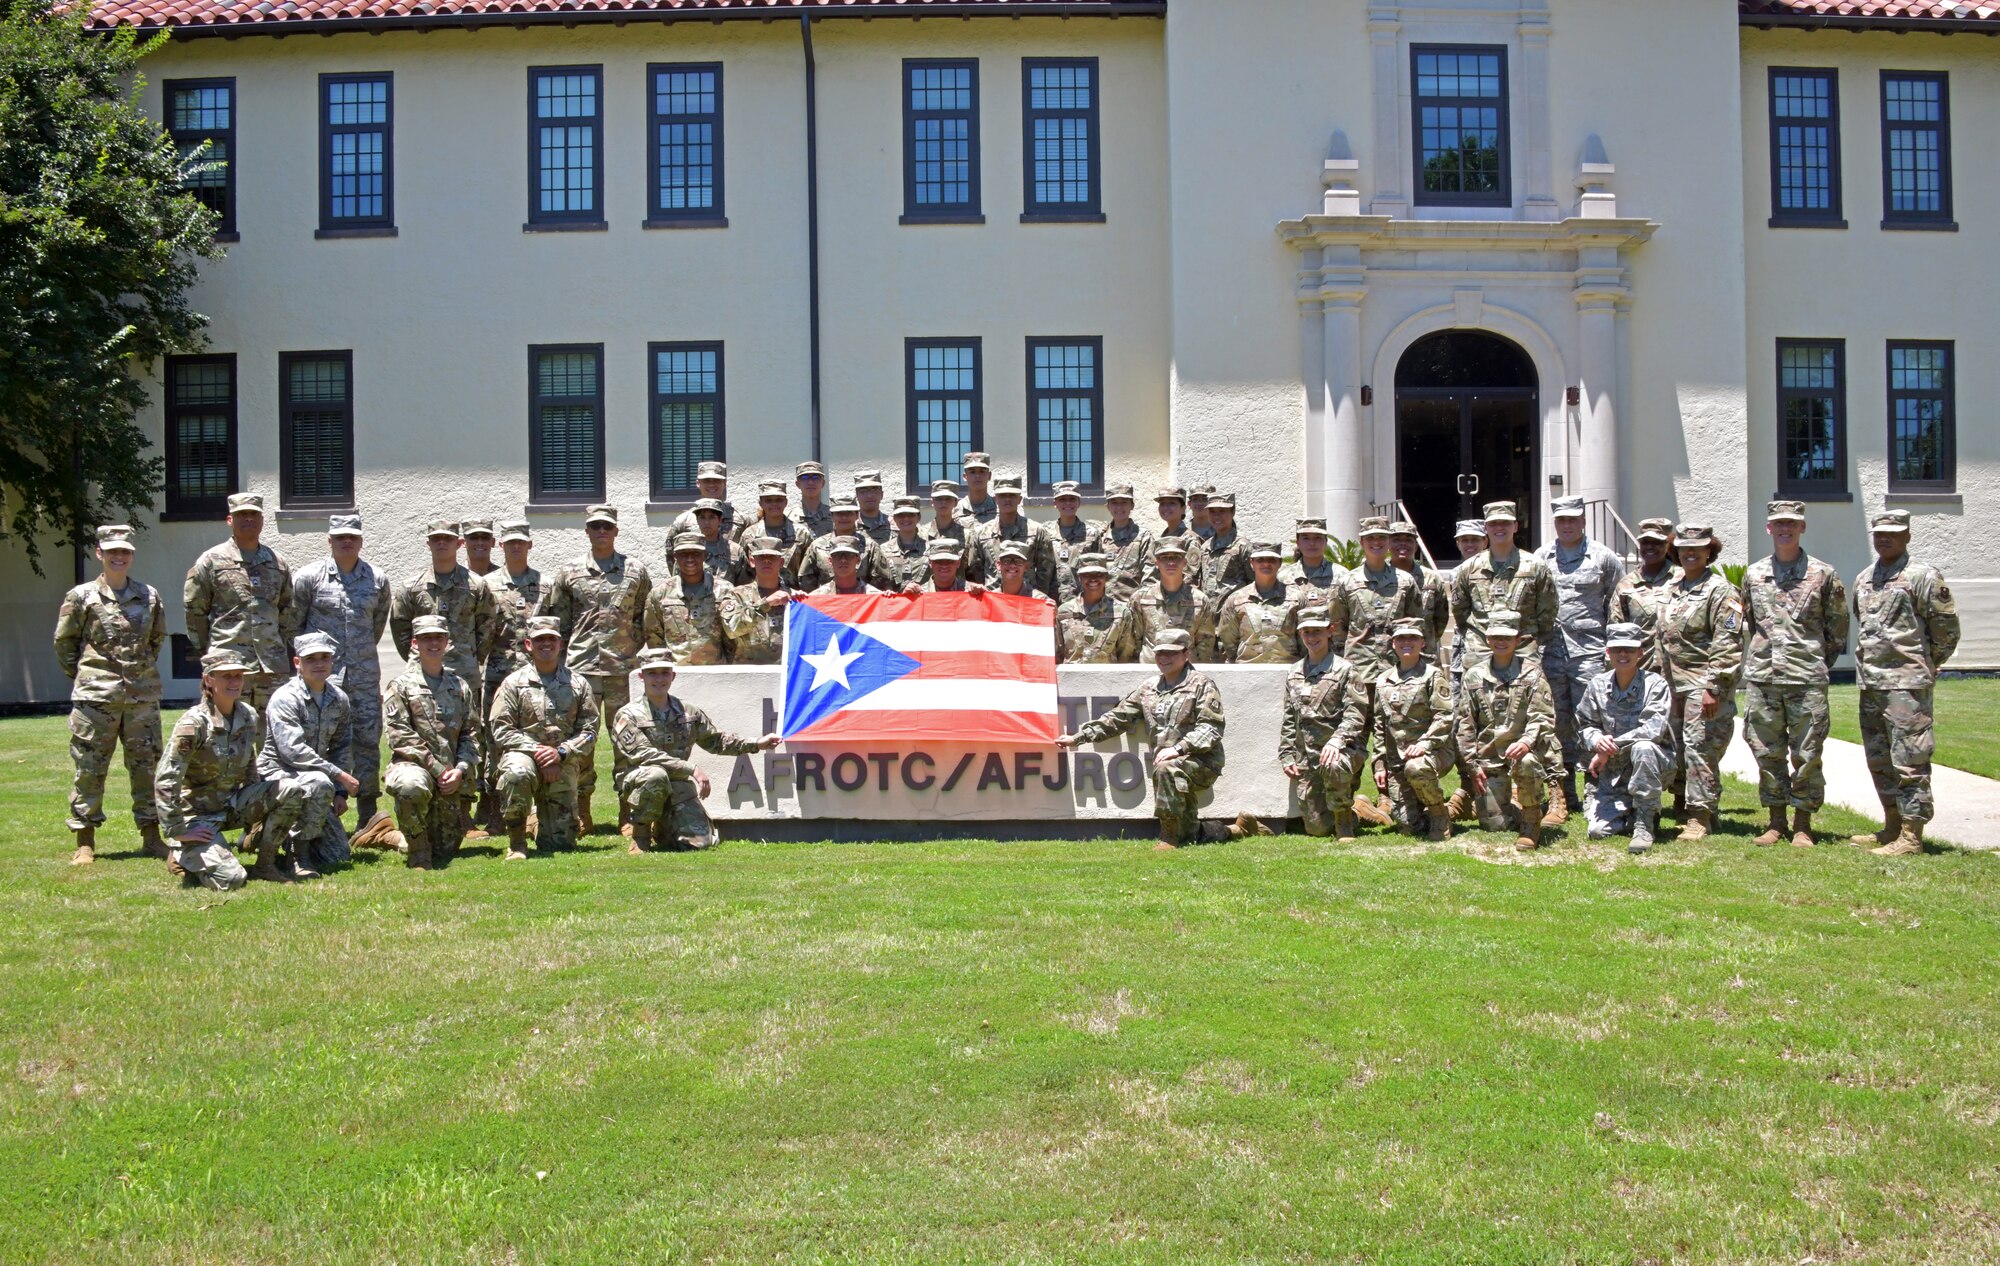 Cadets, participants of  the Puerto Rico Project Language program, pose for a group photo at Maxwell Air Force Base, Alabama, June 17, 2021. The PRPL is a four week program that was derived from the Defense Language Institute English Language Center program that provided U.S. Army trainees, who were permanent residents or U.S. citizens, with English-language training and cultural immersion. (U.S. Air Force photo by Senior Airman Rhonda Smith)